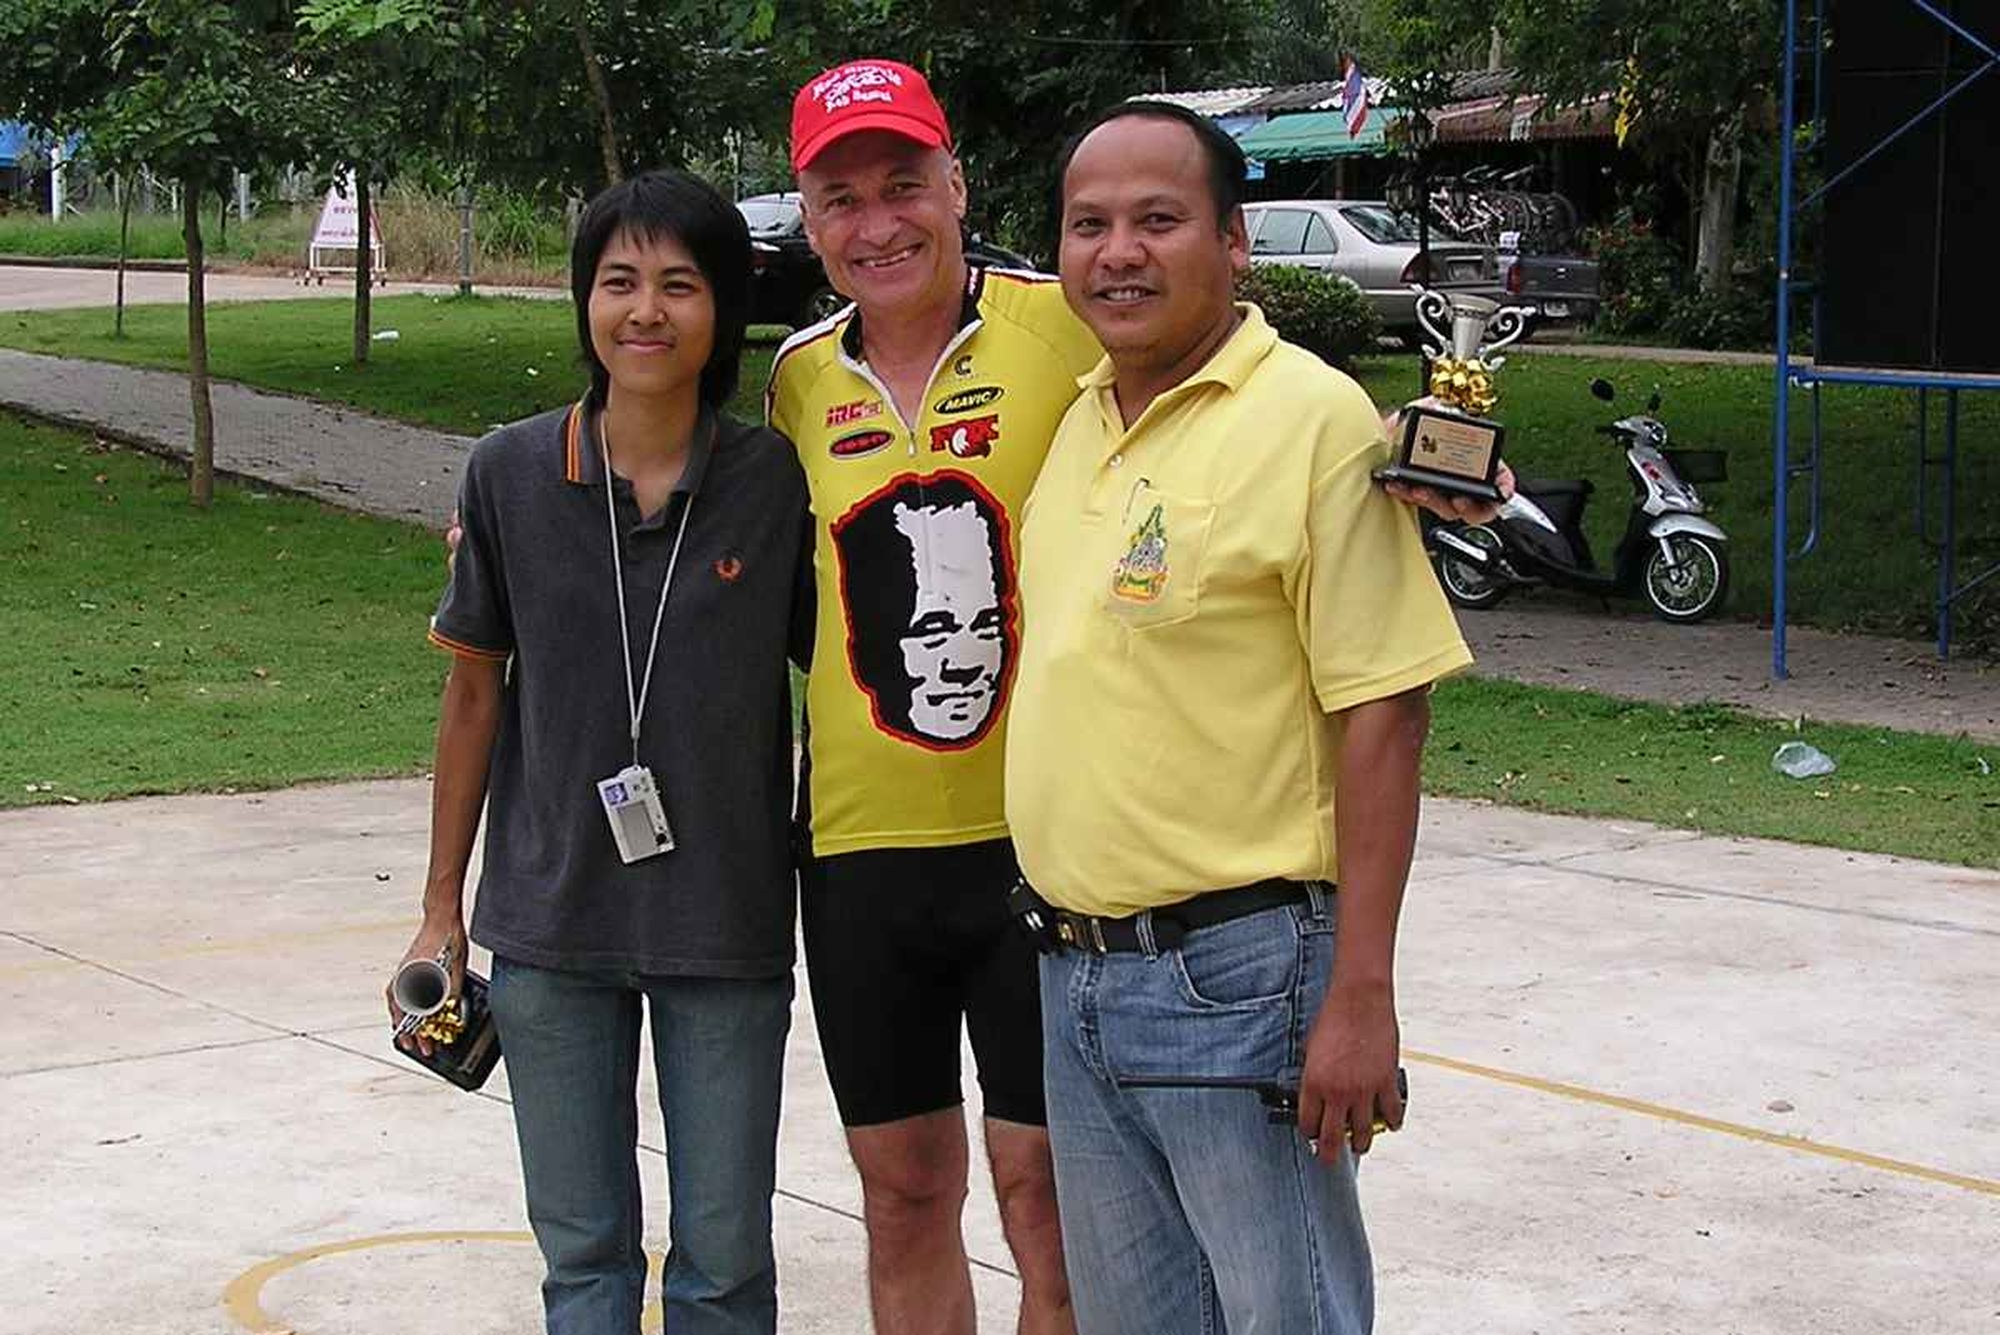 Mike poses with two of the organizers of the 2006 Kiansa MTB race just before the TRJS2oR